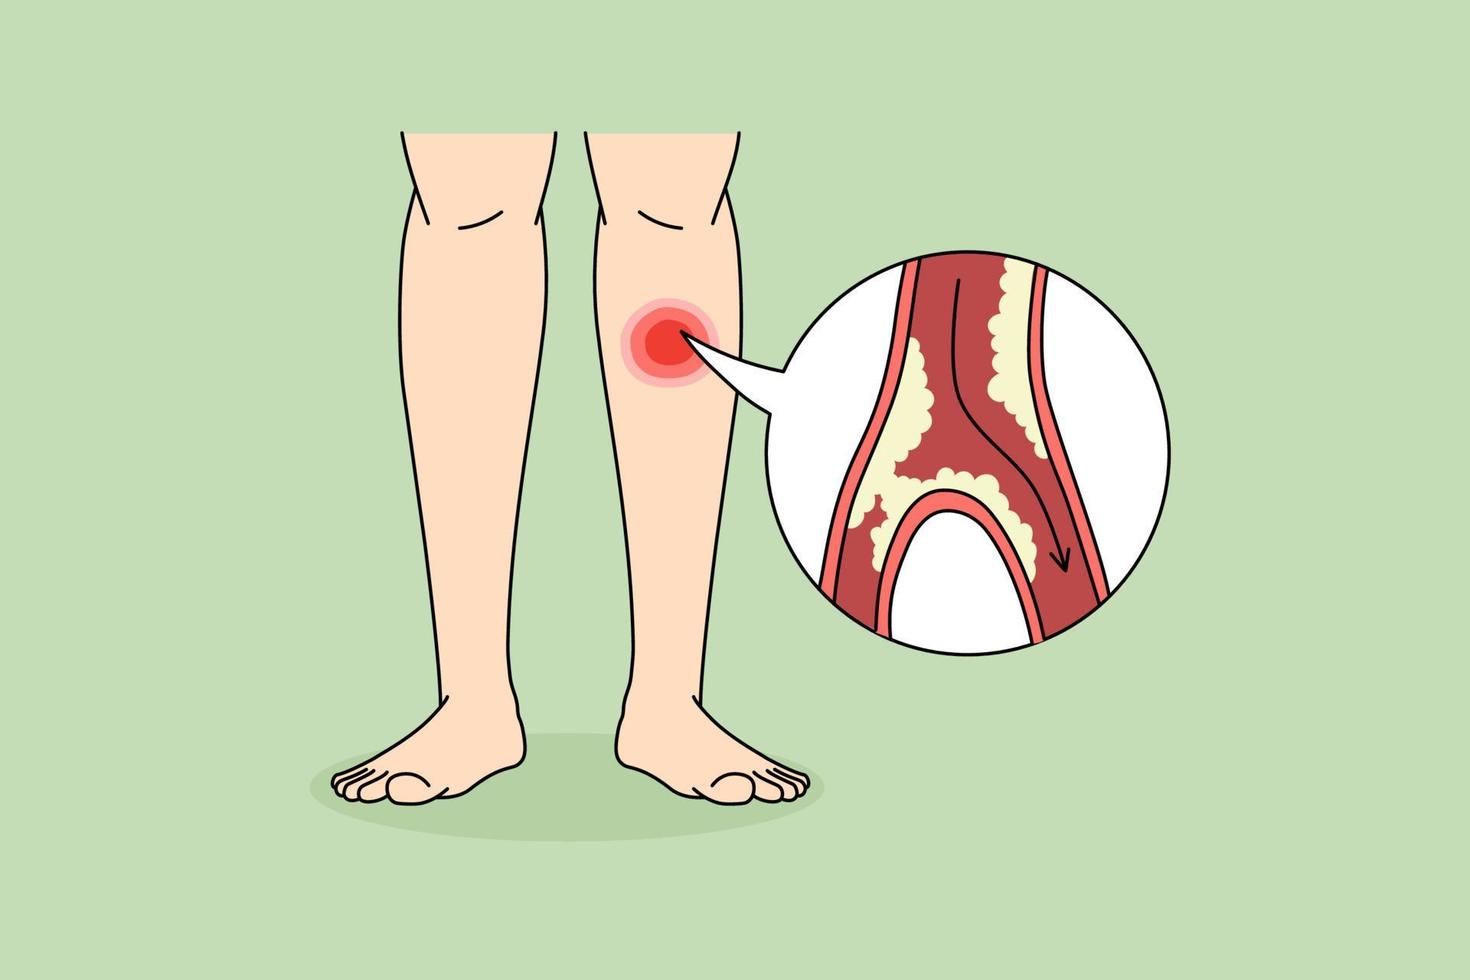 Close up of person suffer from PAD disease having blood vessel blockage in legs. Man struggle with clotted limbs from veins narrowing or blocking. Healthcare concept. Vector illustration.